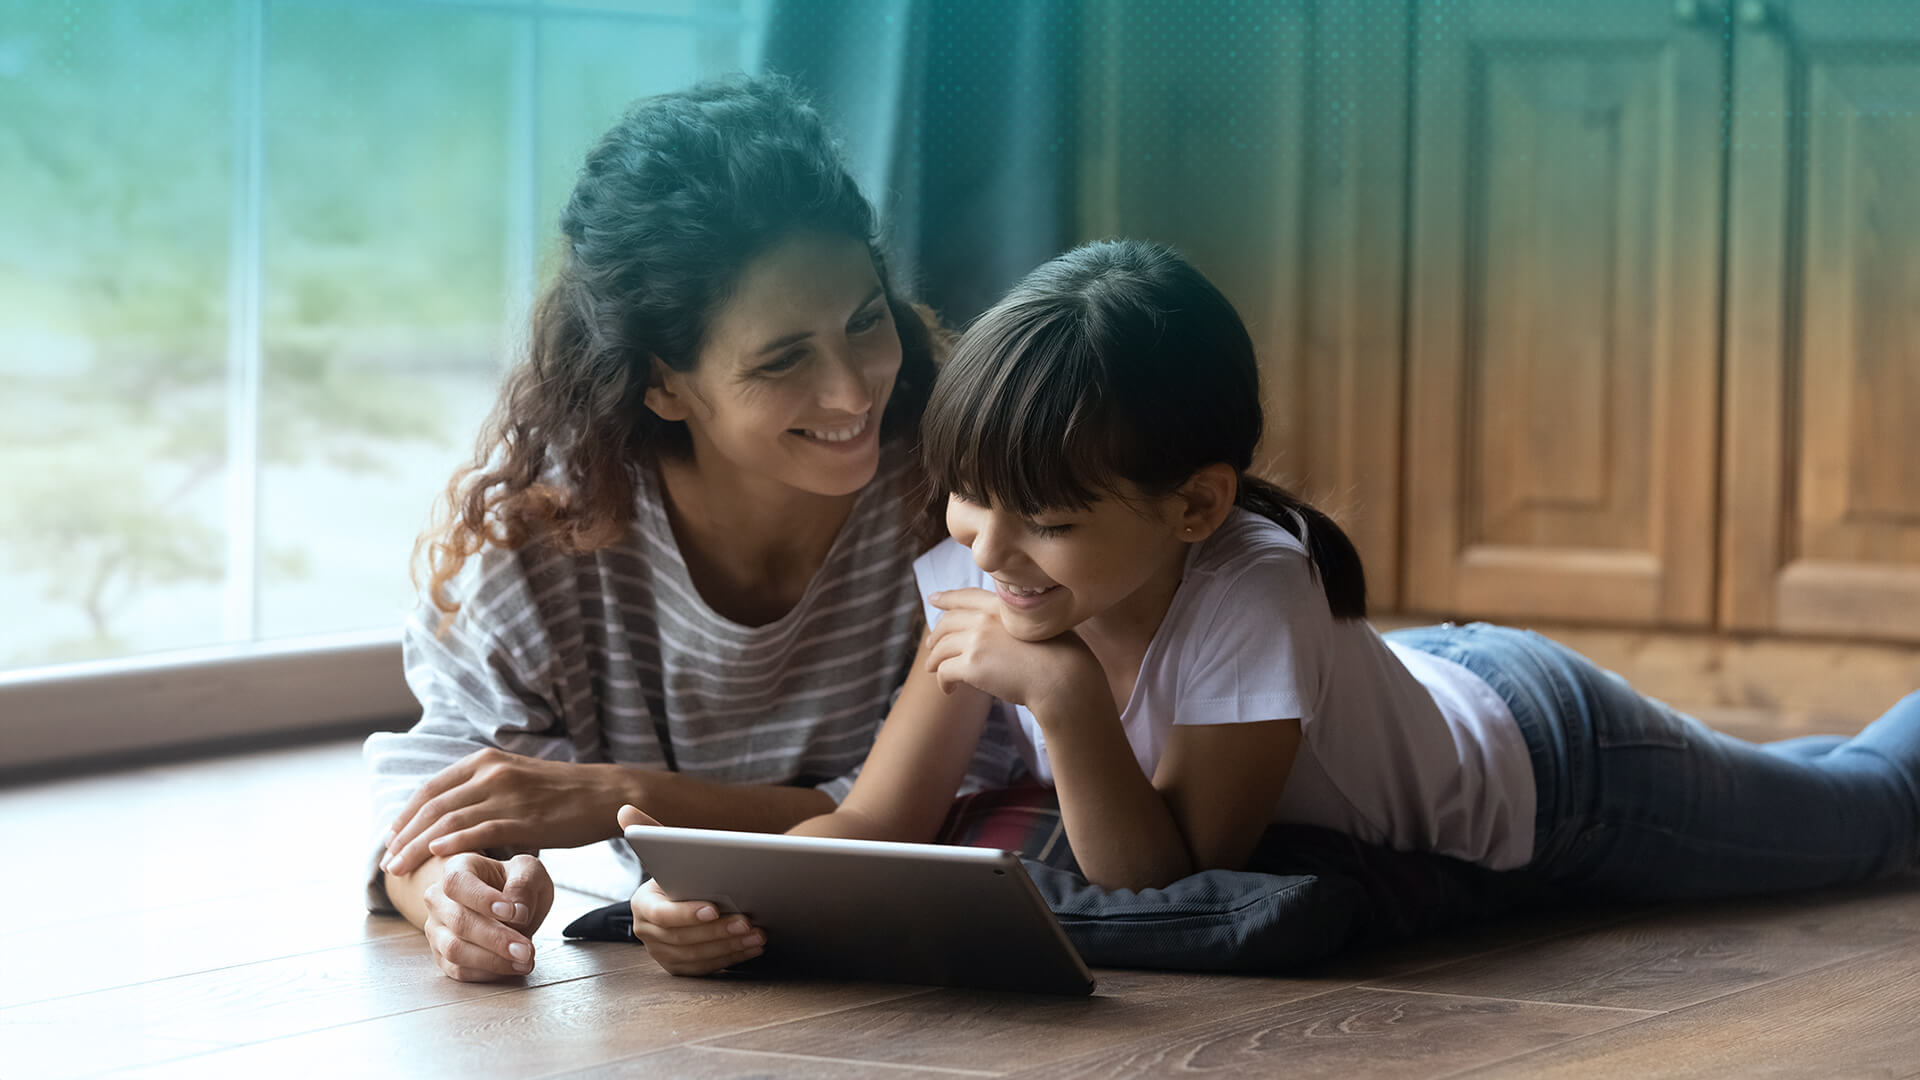 Help your kids stay safe online with open conversations